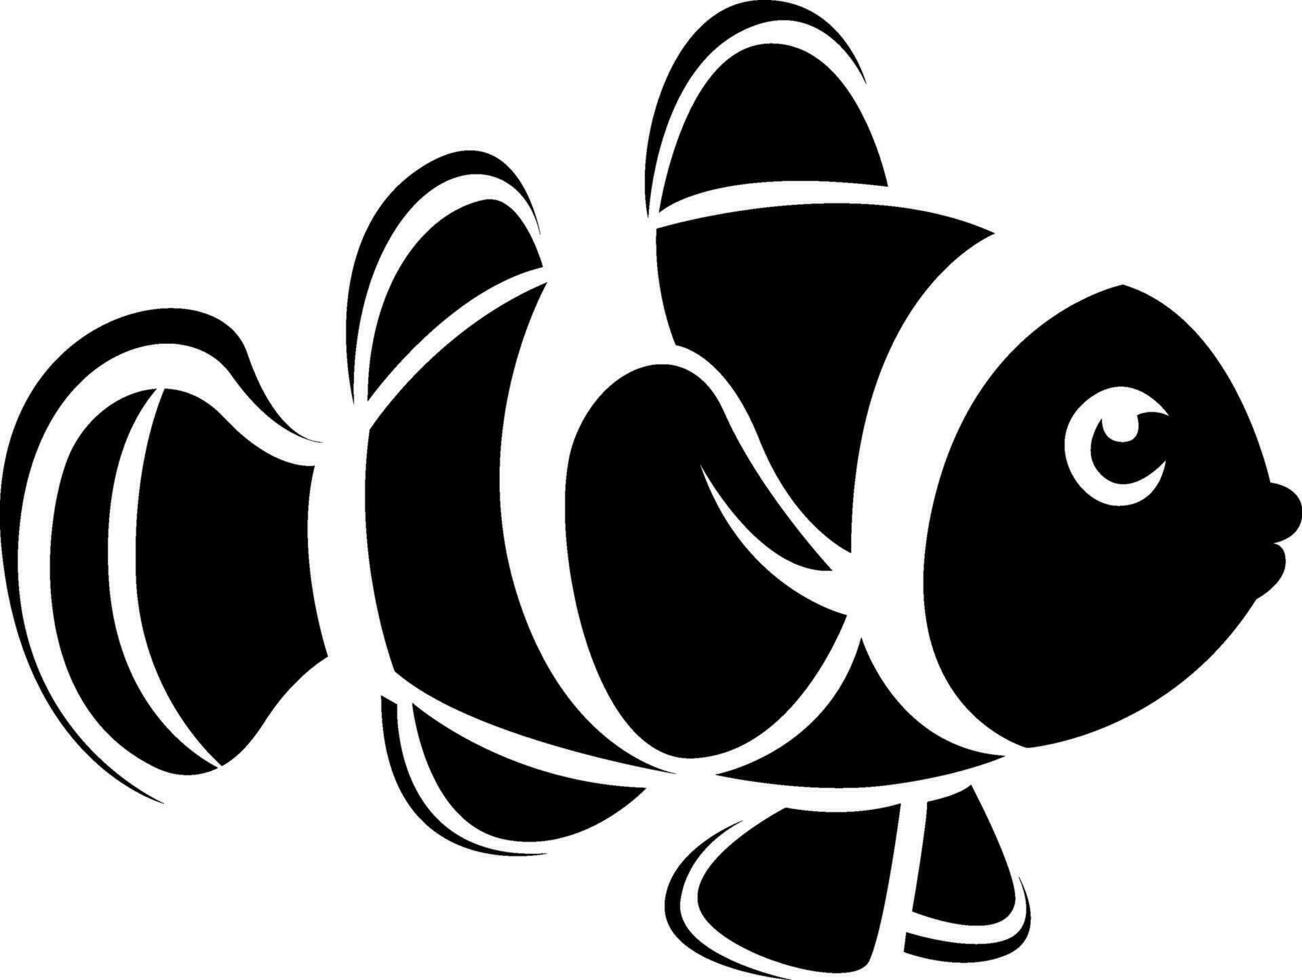 Fish tattoo, tattoo illustration, vector on a white background.